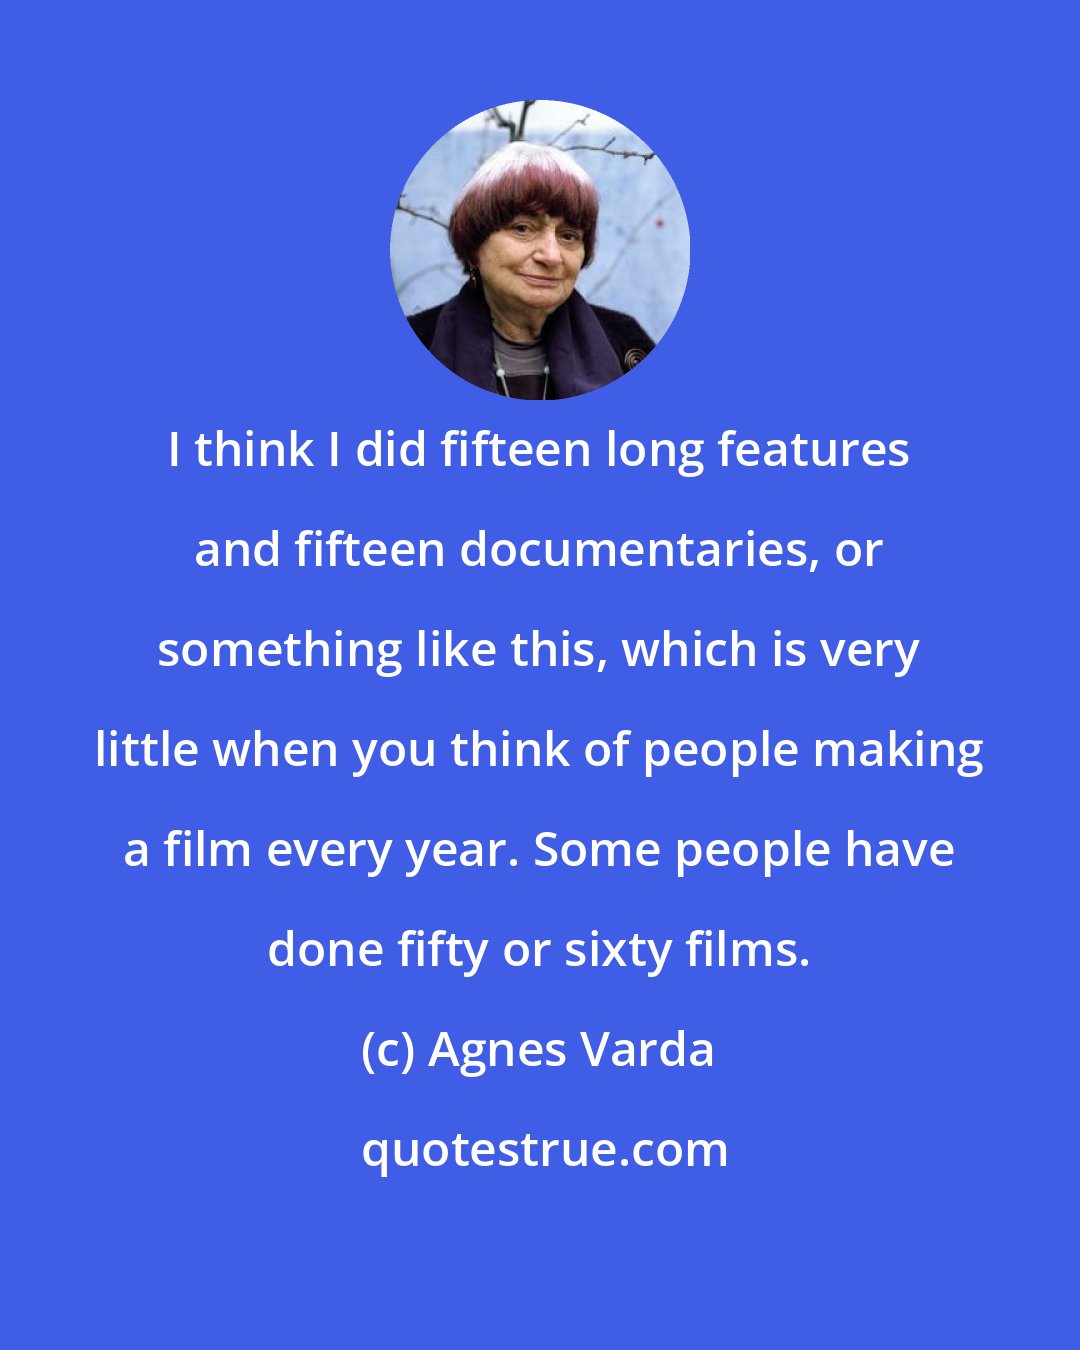 Agnes Varda: I think I did fifteen long features and fifteen documentaries, or something like this, which is very little when you think of people making a film every year. Some people have done fifty or sixty films.